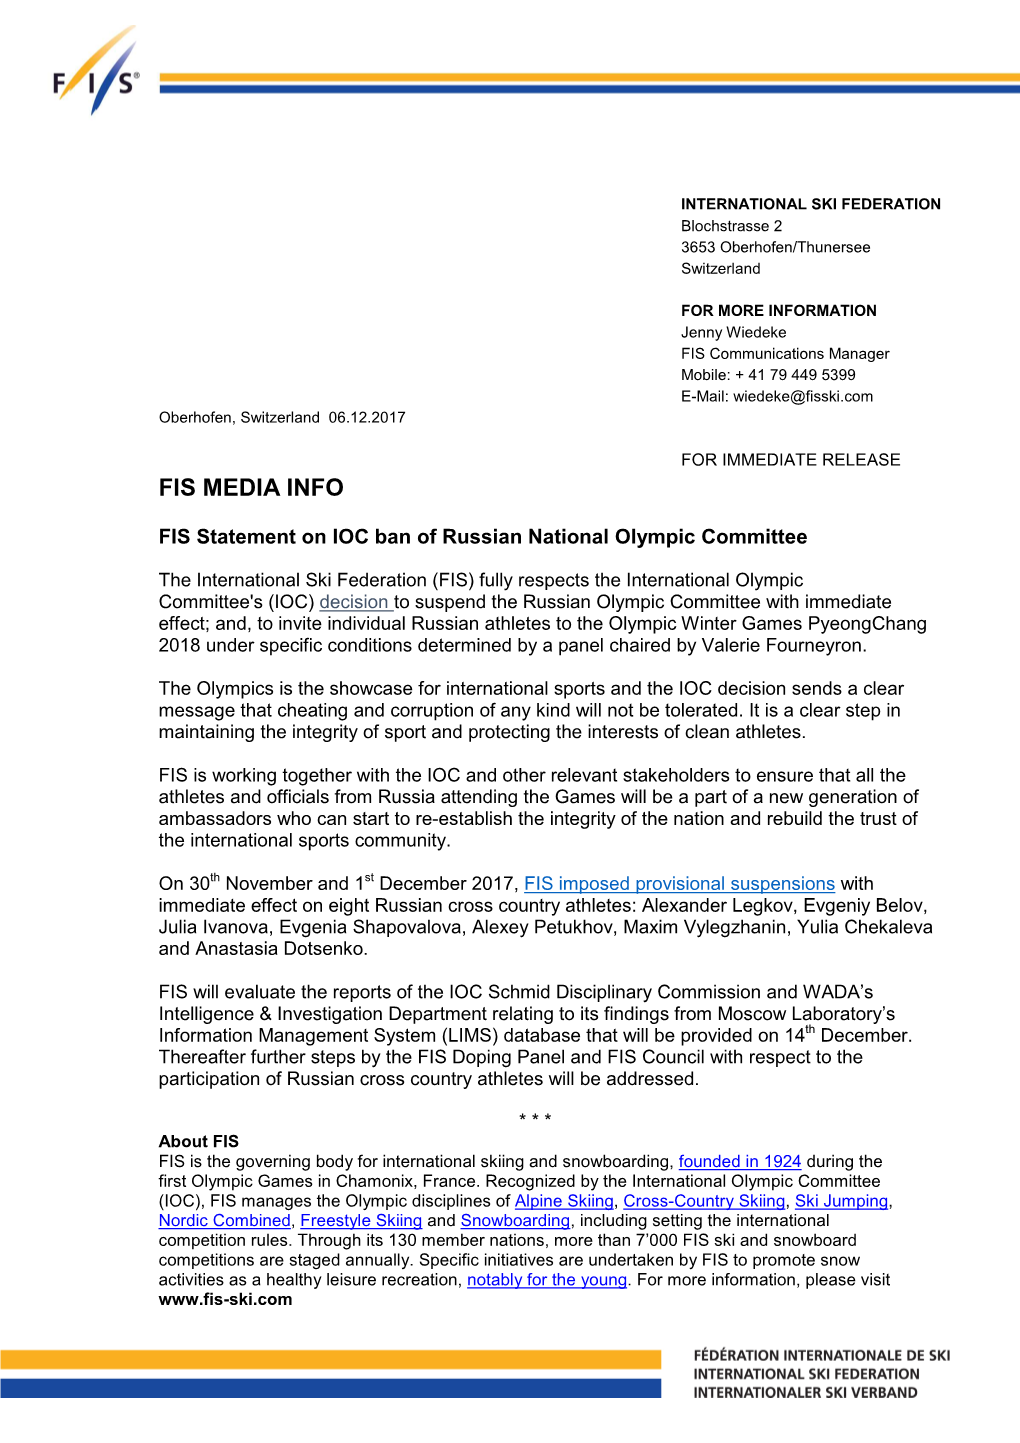 FIS Statement on IOC Ban of Russian National Olympic Committee